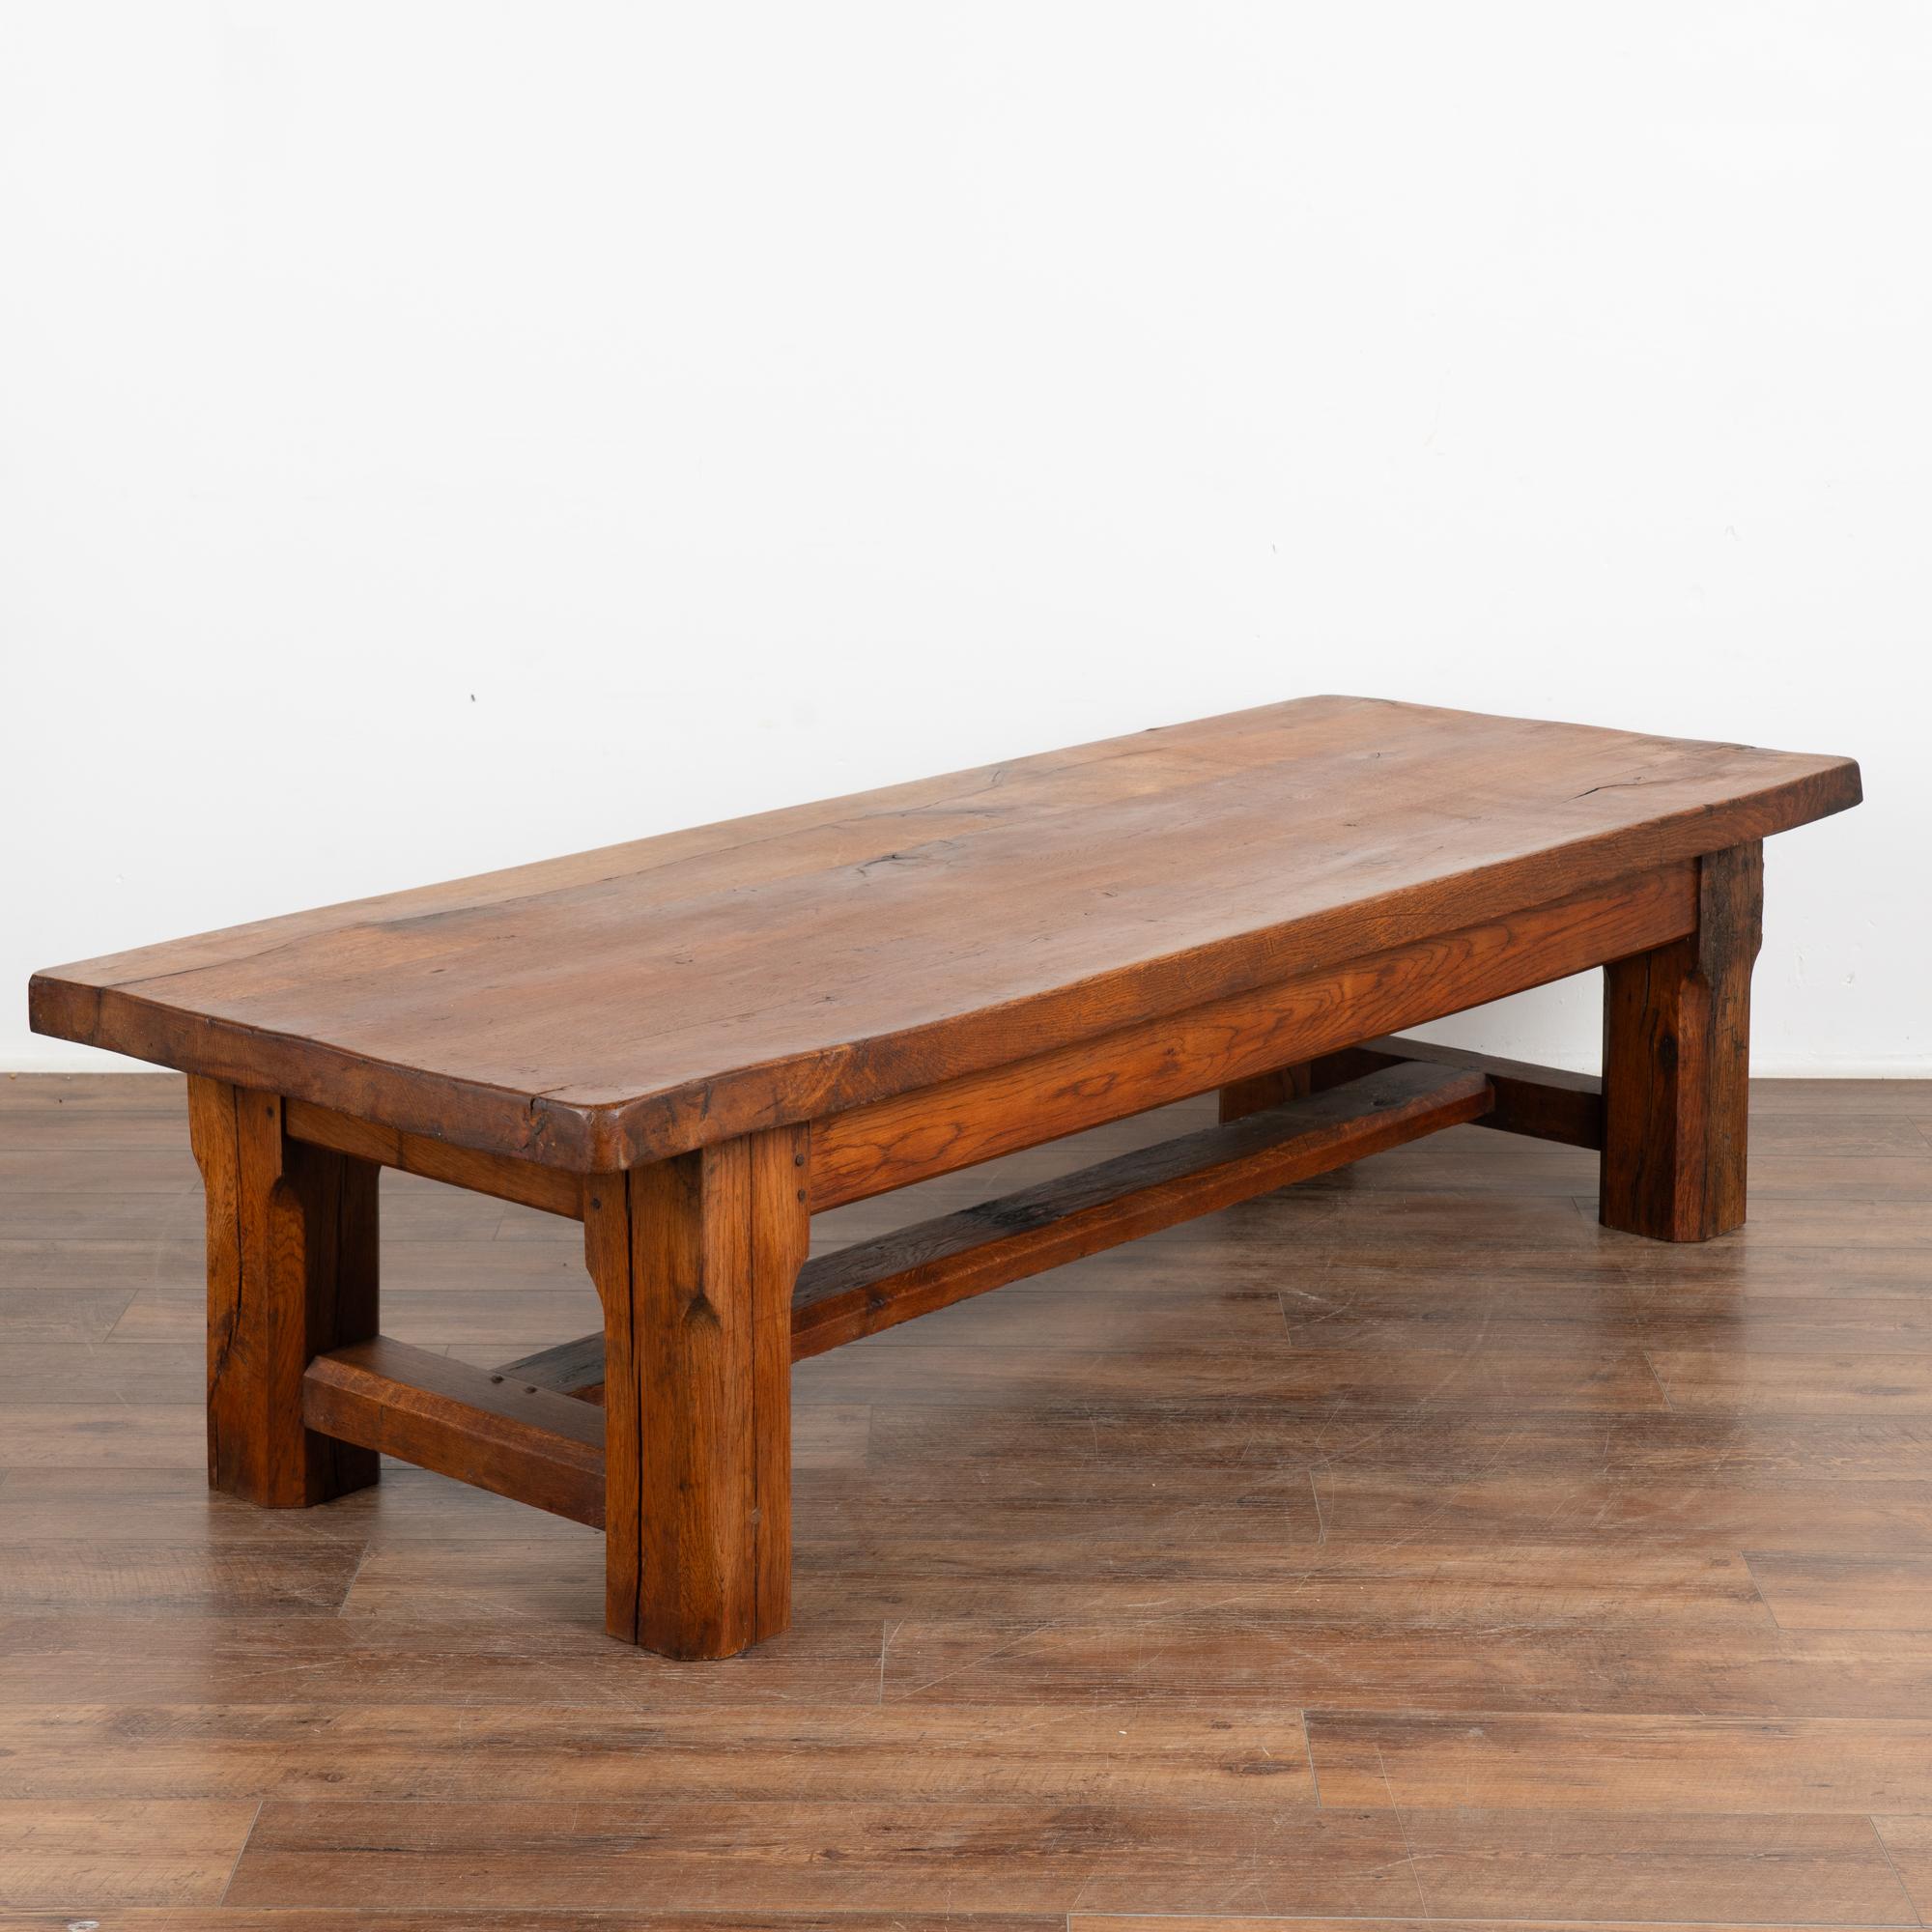 Large Coffee Table With Single Drawer from France, circa 1900 For Sale 6